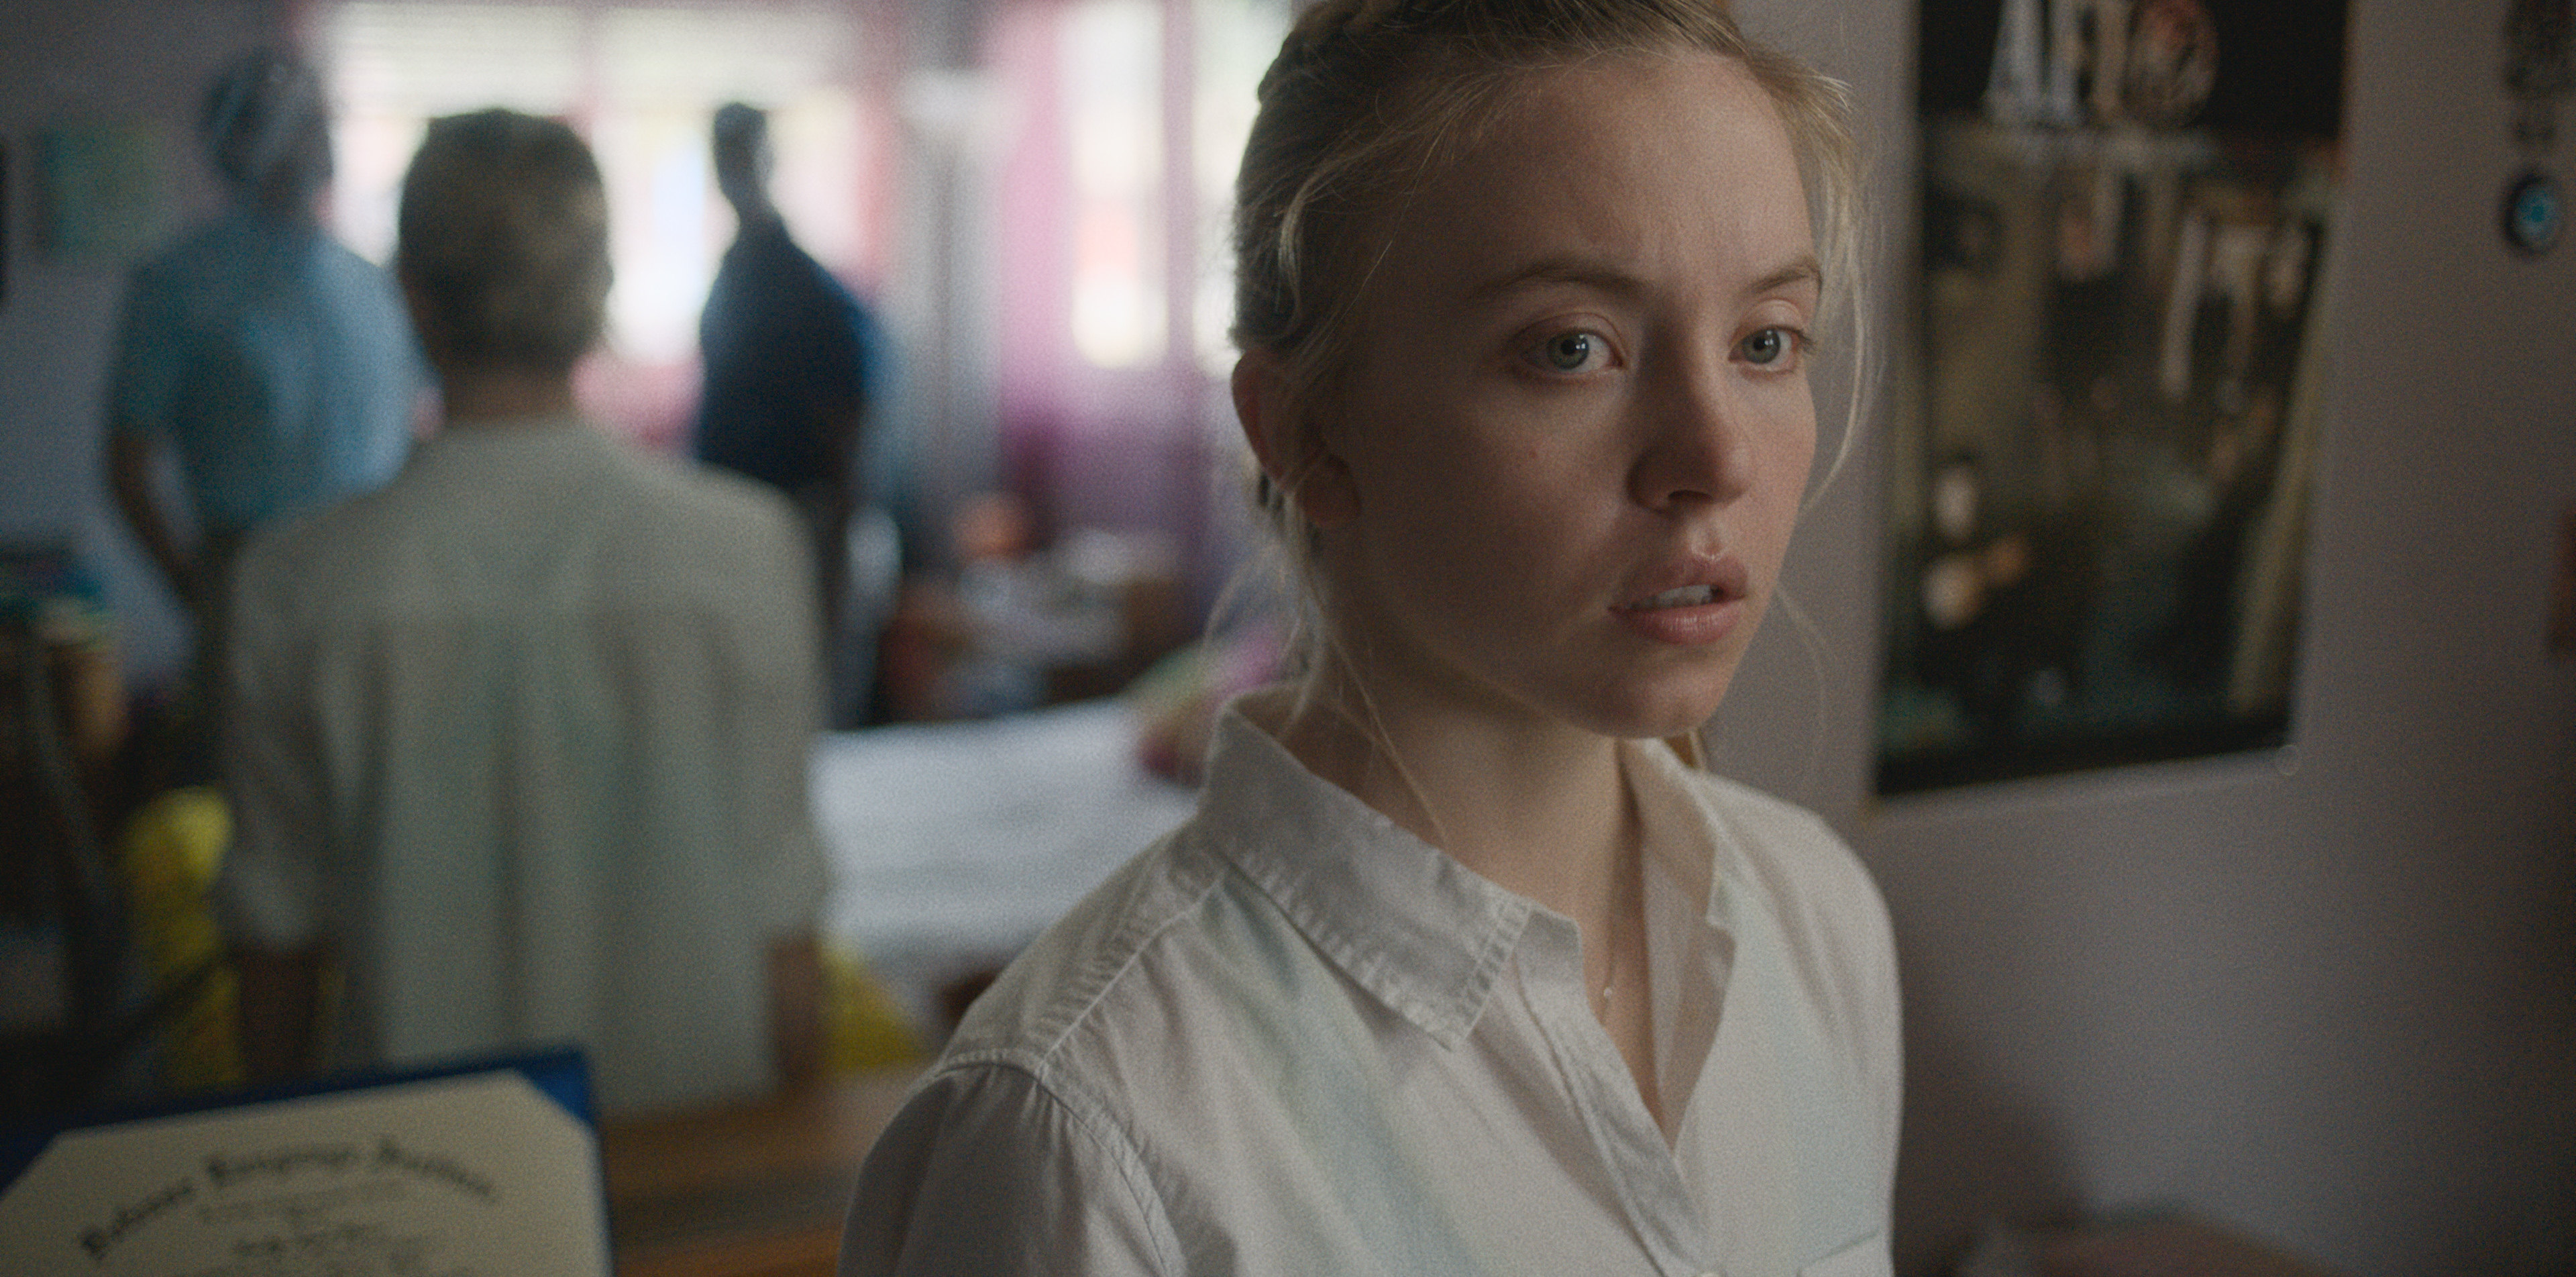 Sydney Sweeney in a still from Reality. Photo: Seaview